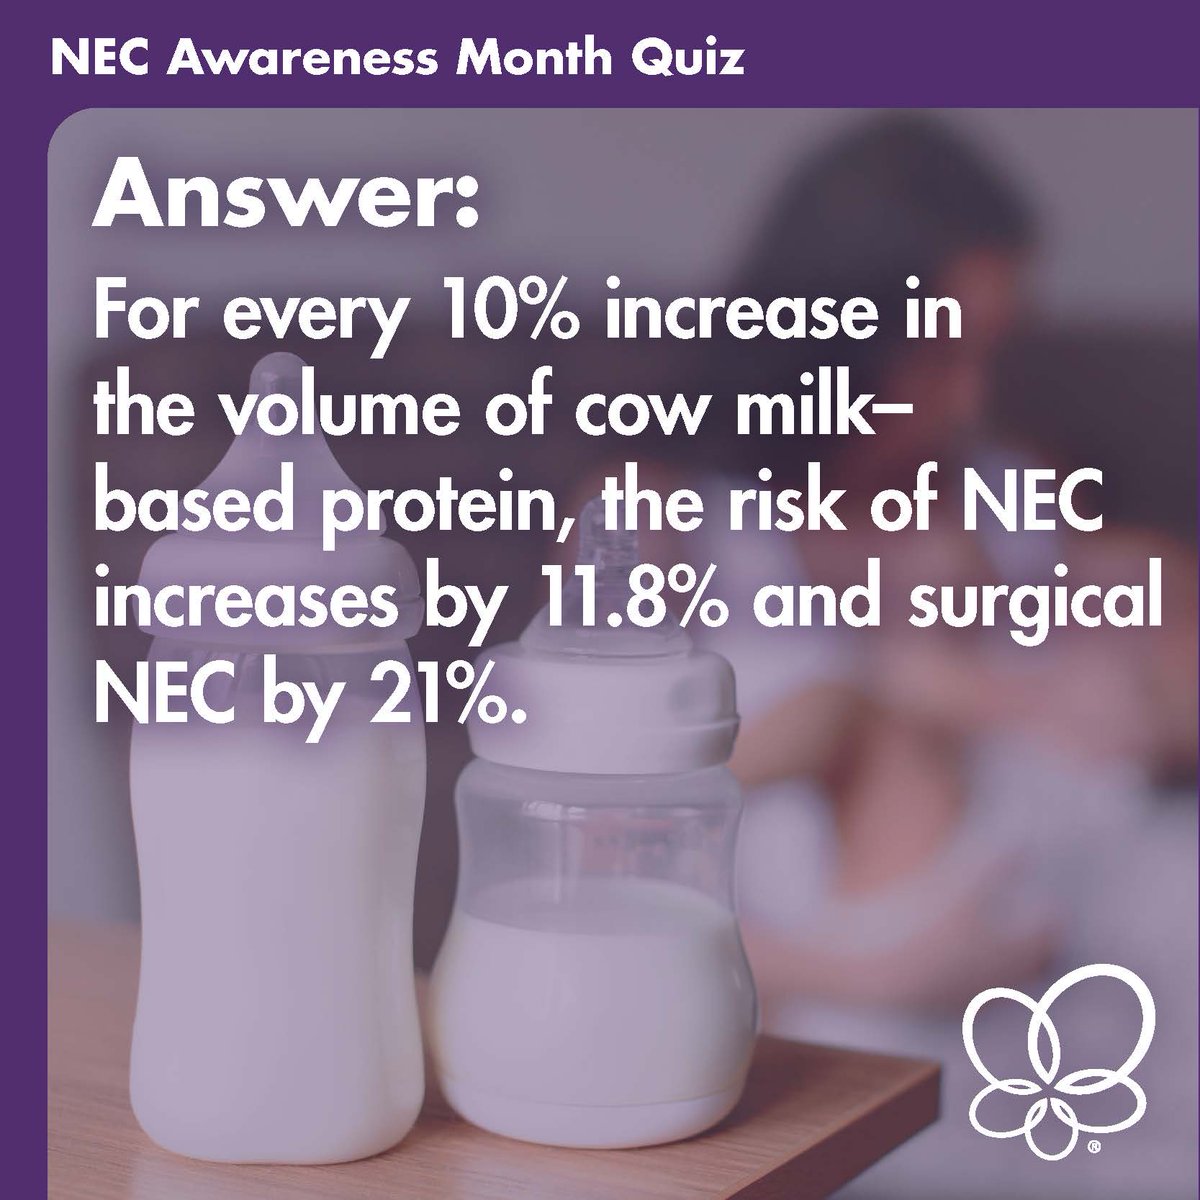 Did you get it correct? For every 10% increase in the volume of cow milk-based protein, the risk of NEC increases by 11.8%, and surgical NEC by 21%. Understanding these factors is crucial for understand how an exclusive human milk diet can improve outcomes for babies.